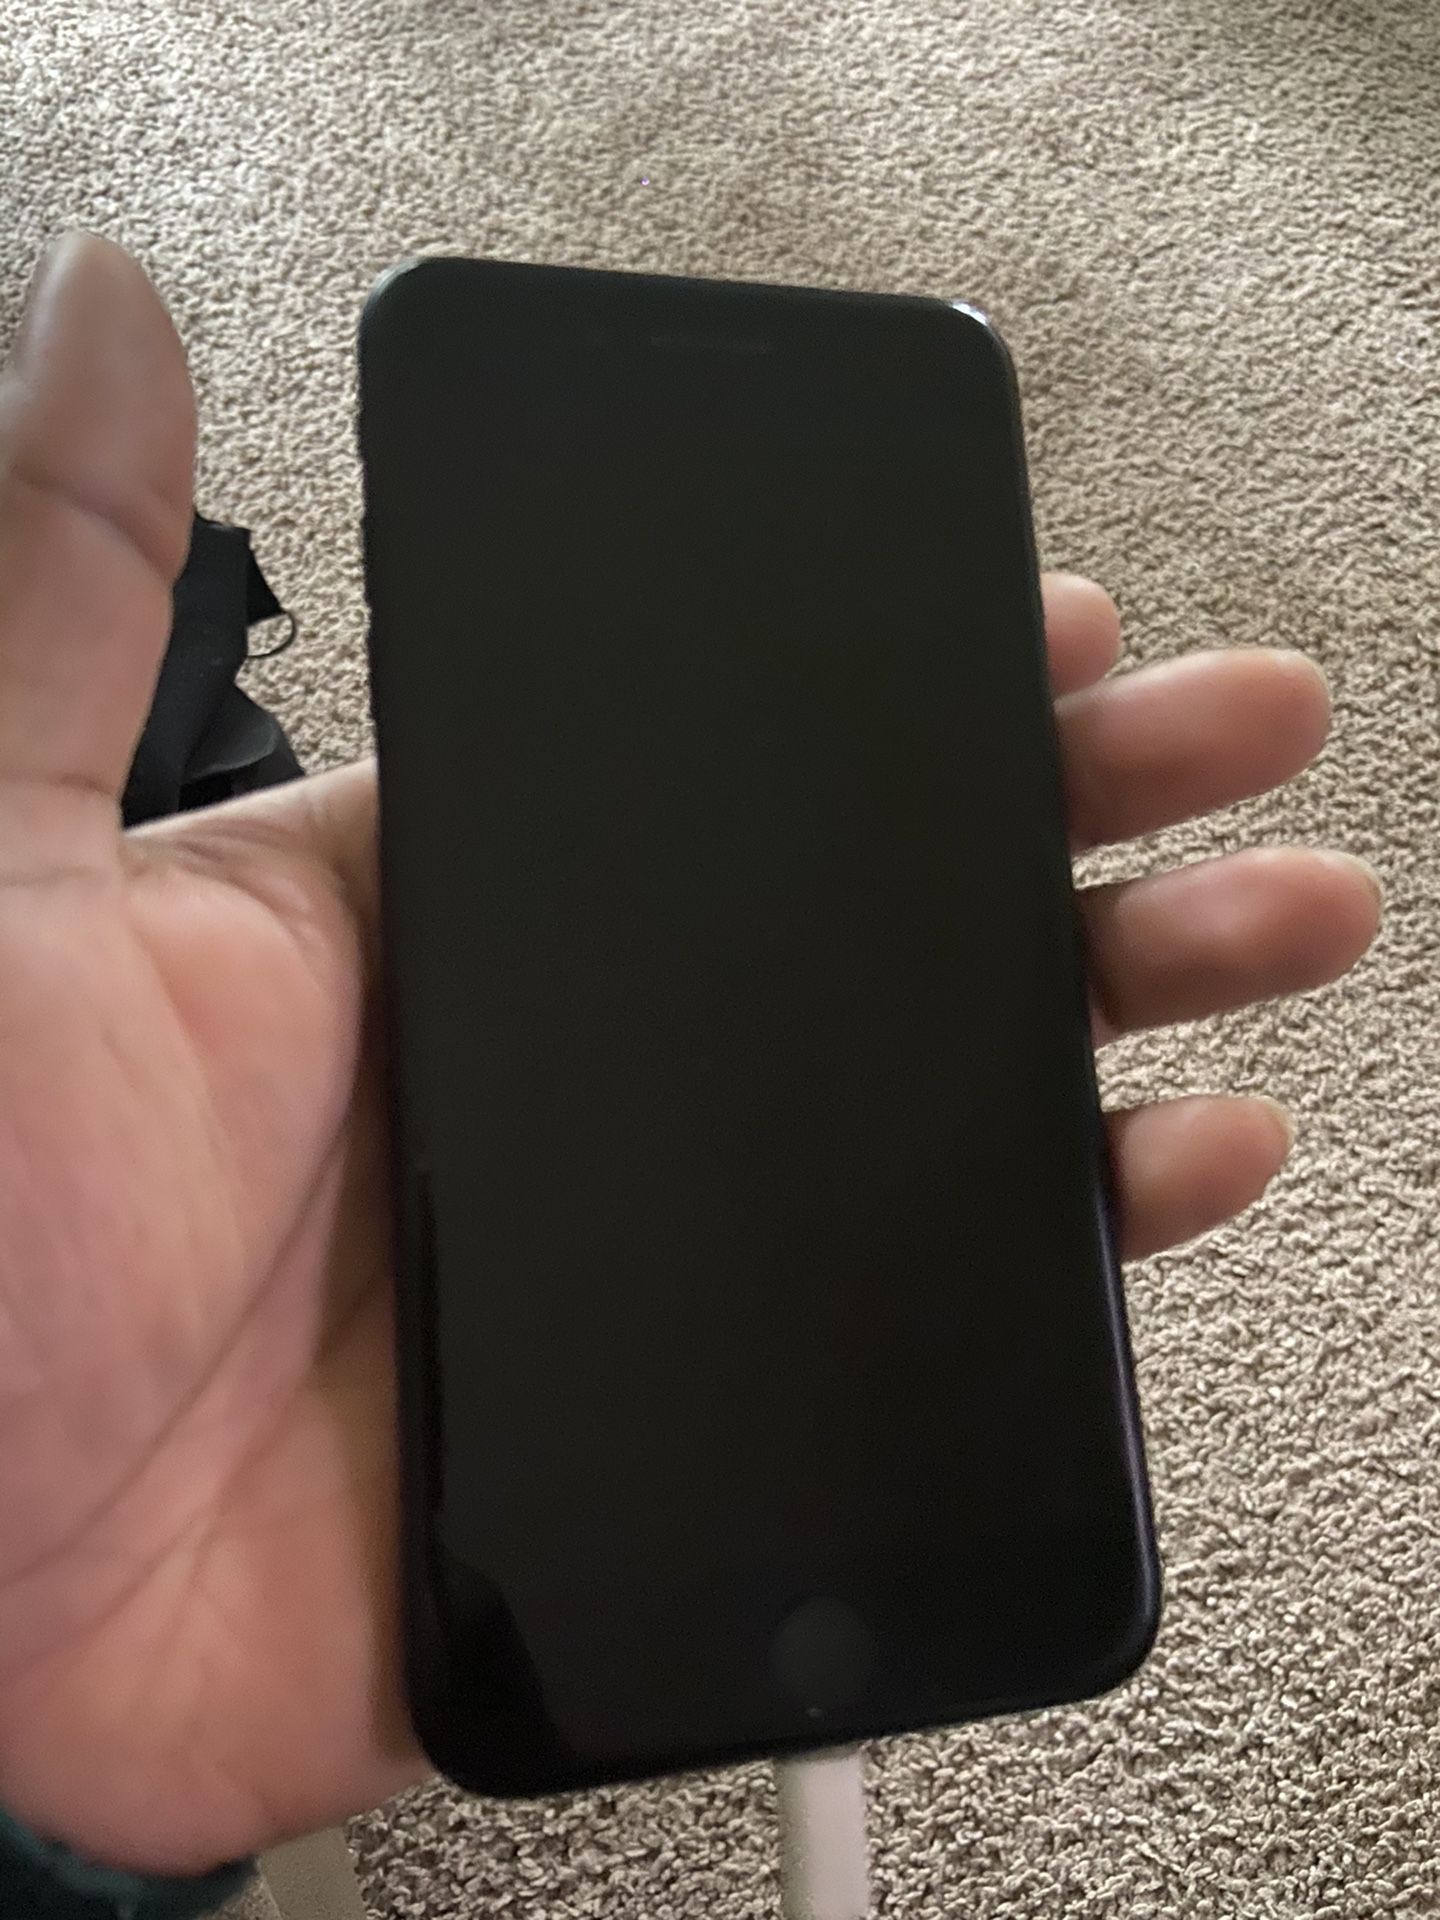 iPhone 7 Plus 64GB + AirPods (GREAT CONDITION)